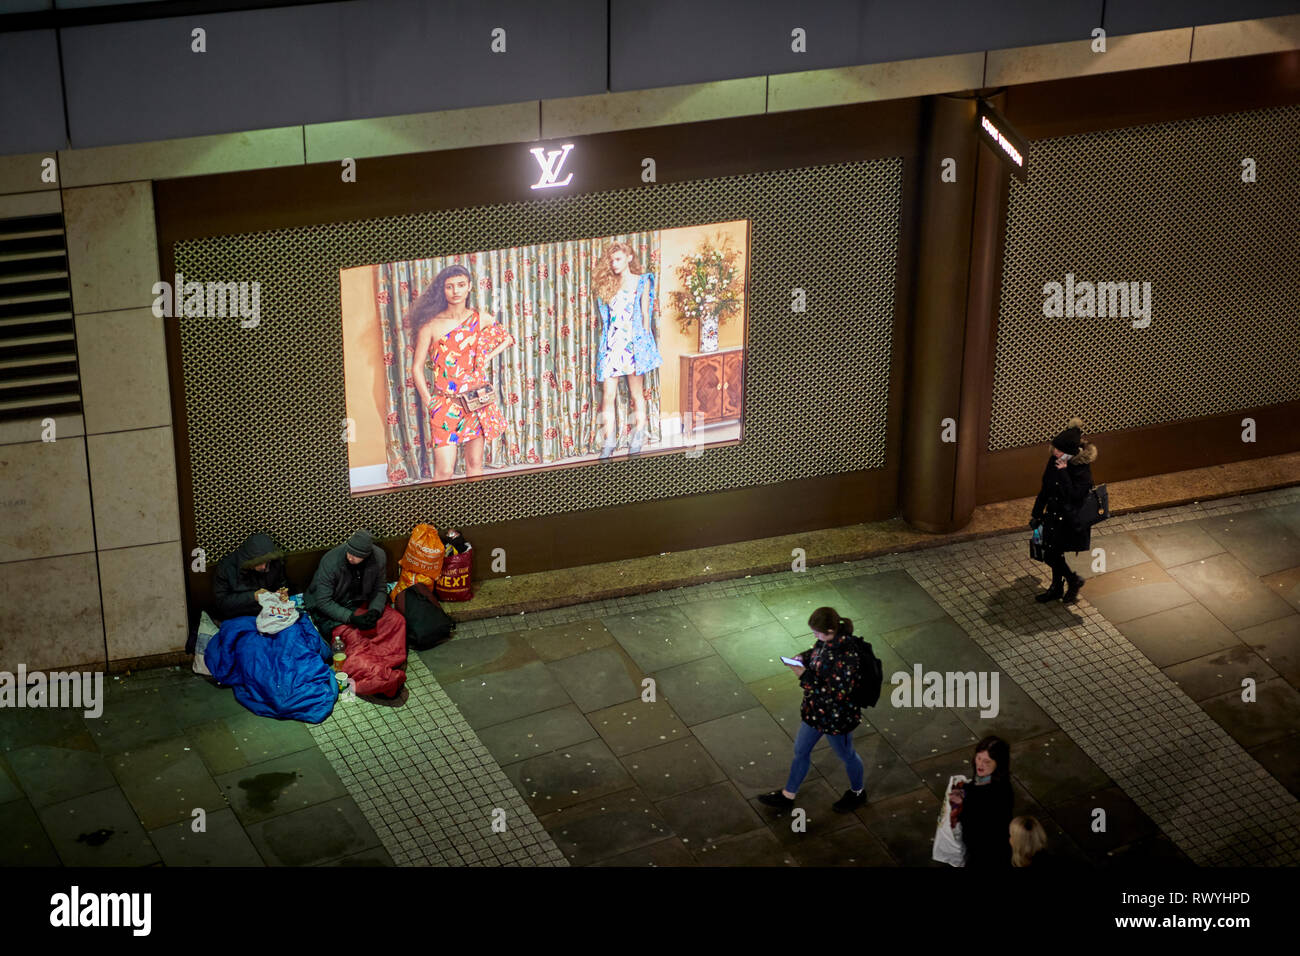 Homeless Manchester Stock Photos & Homeless Manchester Stock Images - Alamy